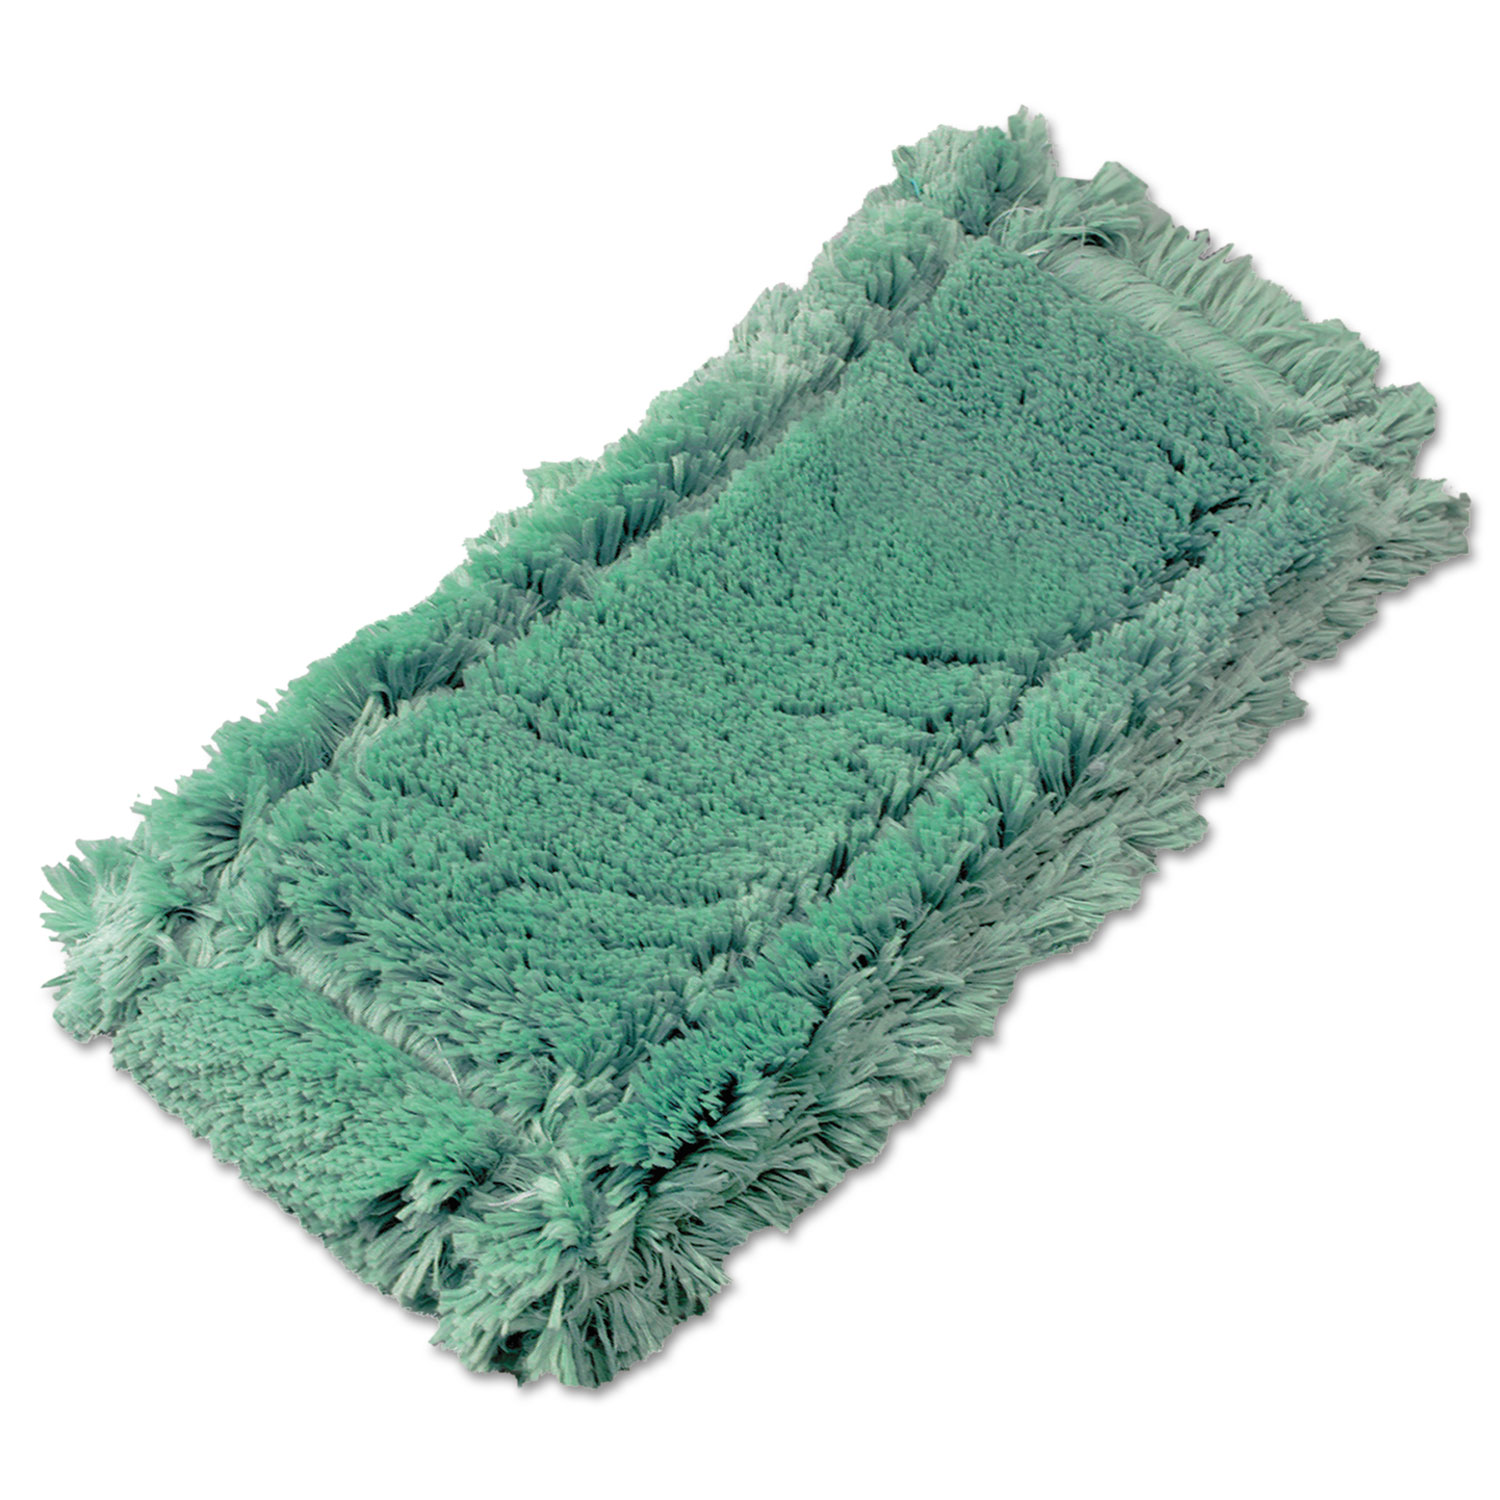  Unger PHW20 Microfiber Washing Pad, Green, 6 x 8 (UNGPHW20) 